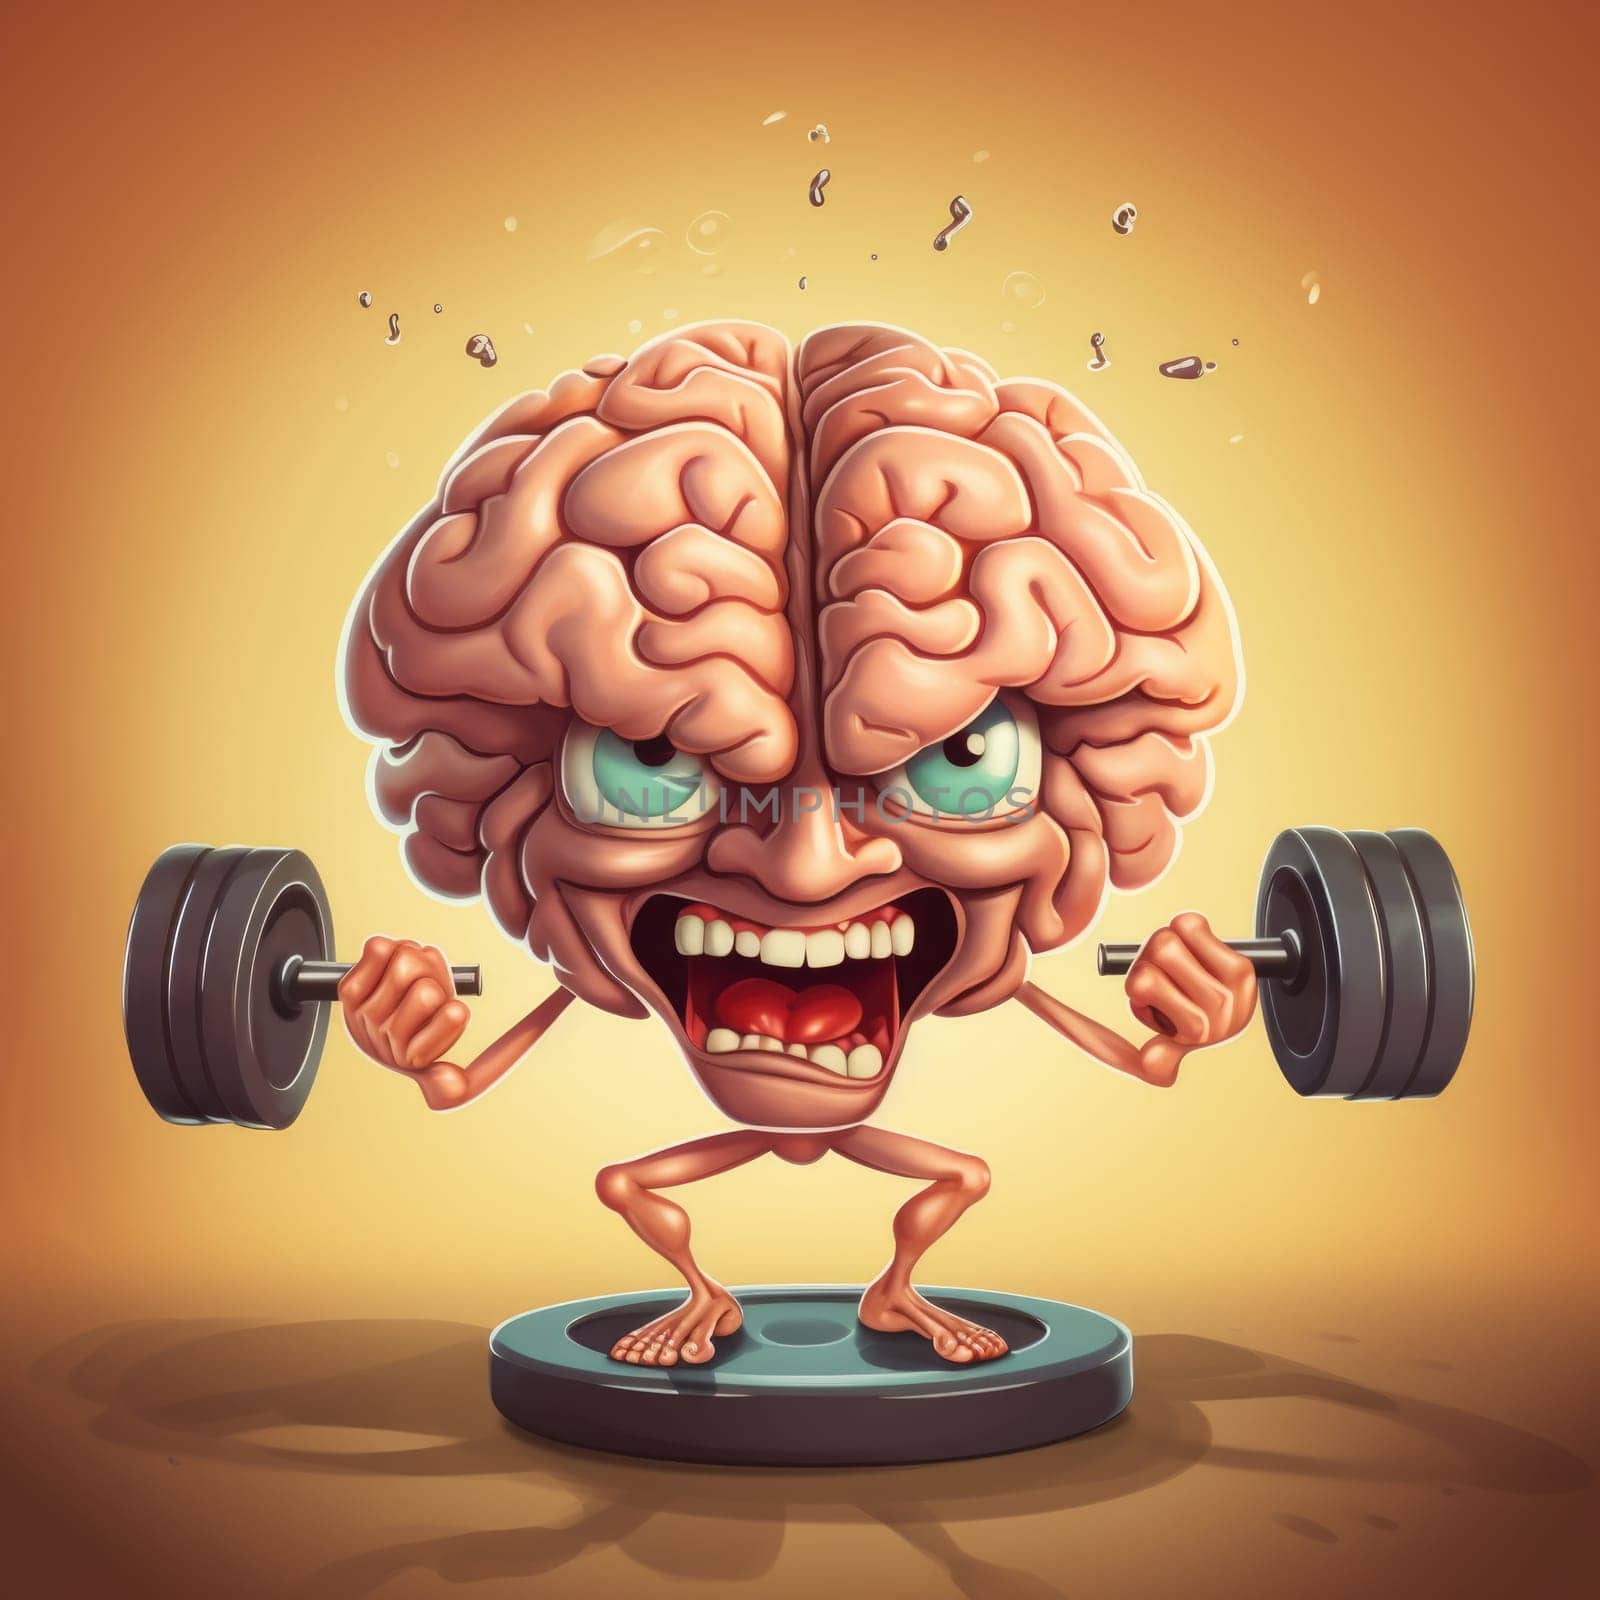 A cartoon image featuring a brain actively lifting a barbell, showcasing its strength and determination.